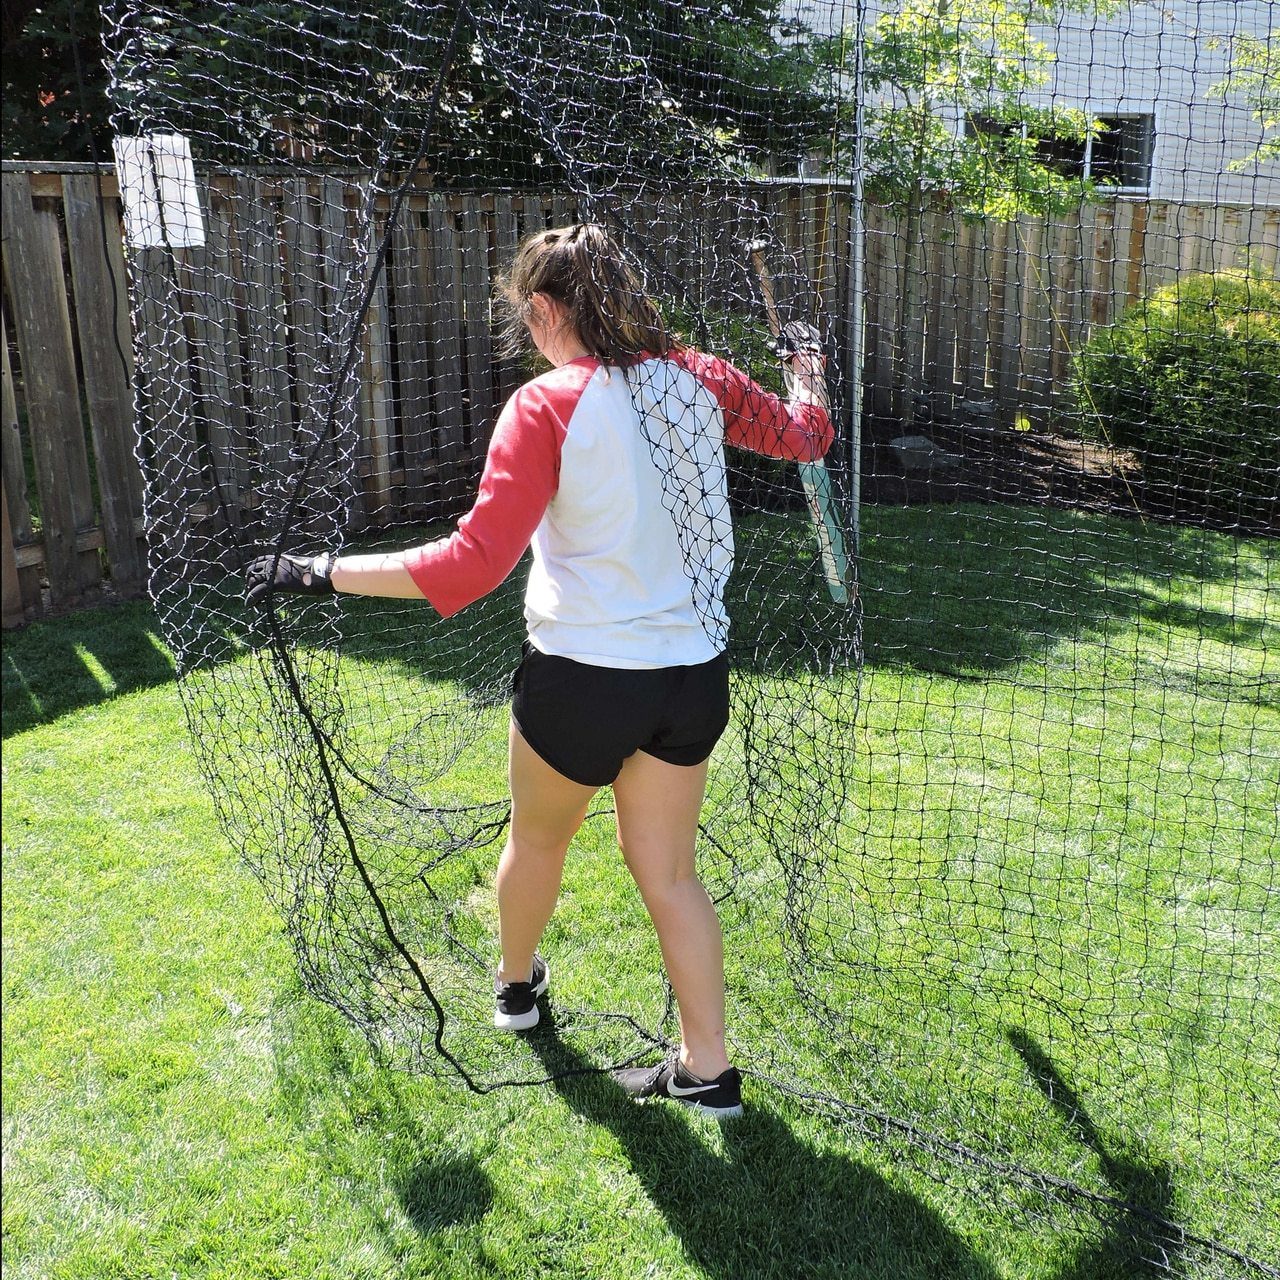 Jugs Hit at Home Complete Backyard Batting Cage Opening